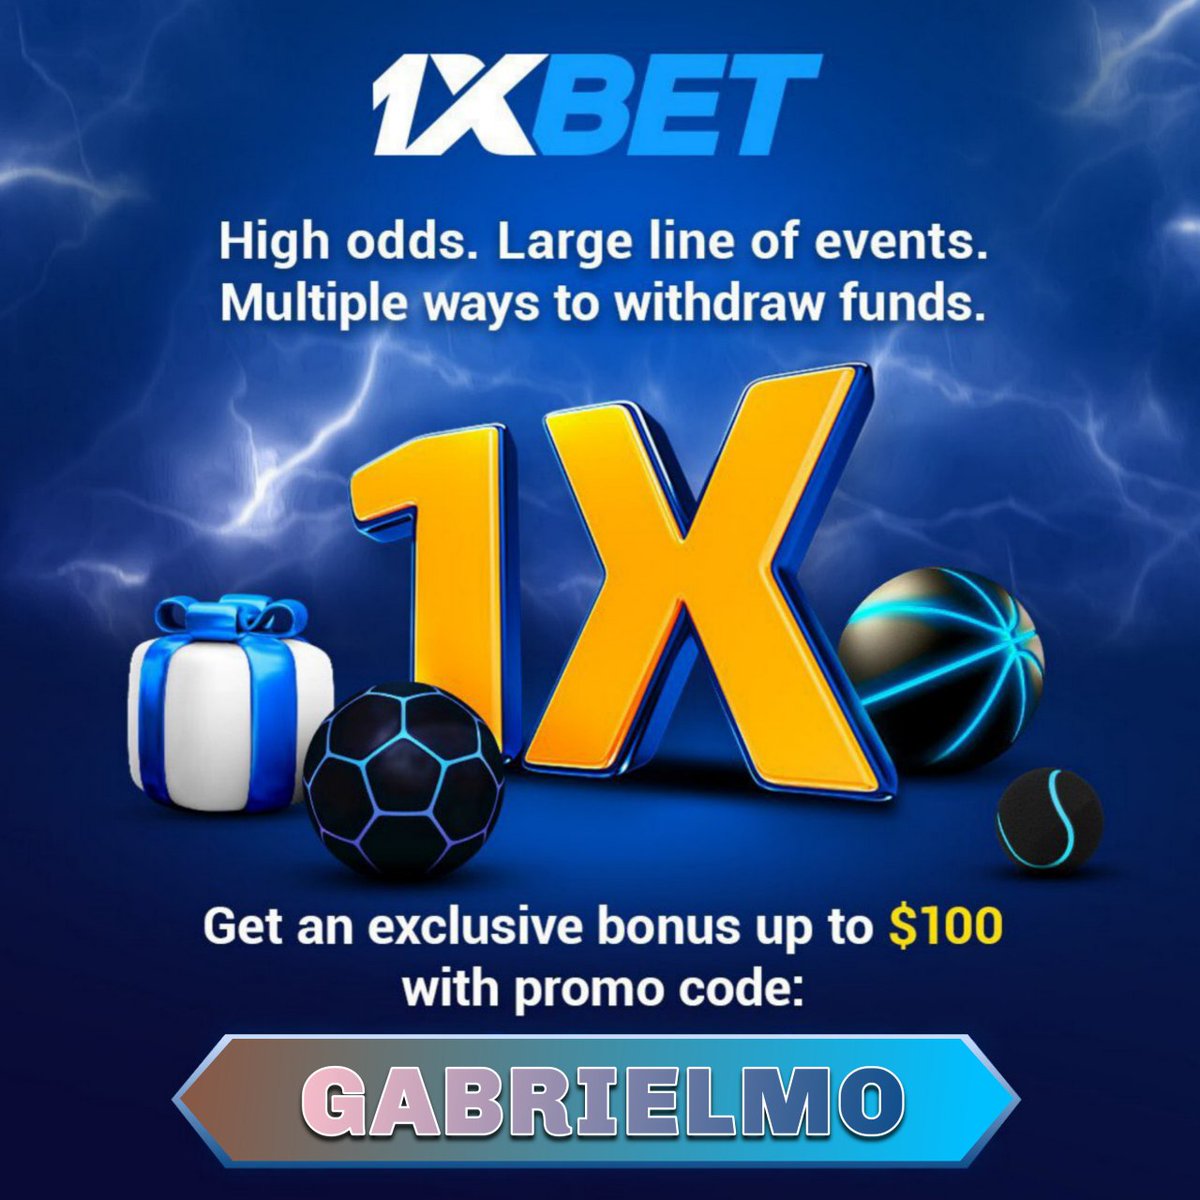 Benefits of using #1xbet, just to mention a few ☑️ 200% Bonus on your 1st deposit ☑️ Wide range of markets ☑️ Variety of sports to play @ day ☑️ Boosted odds ☑️ Winnings nazo ni 💯 % Register today 👉 tapxlink.com/GABRIELMO_link Promocode: GABRIELMO